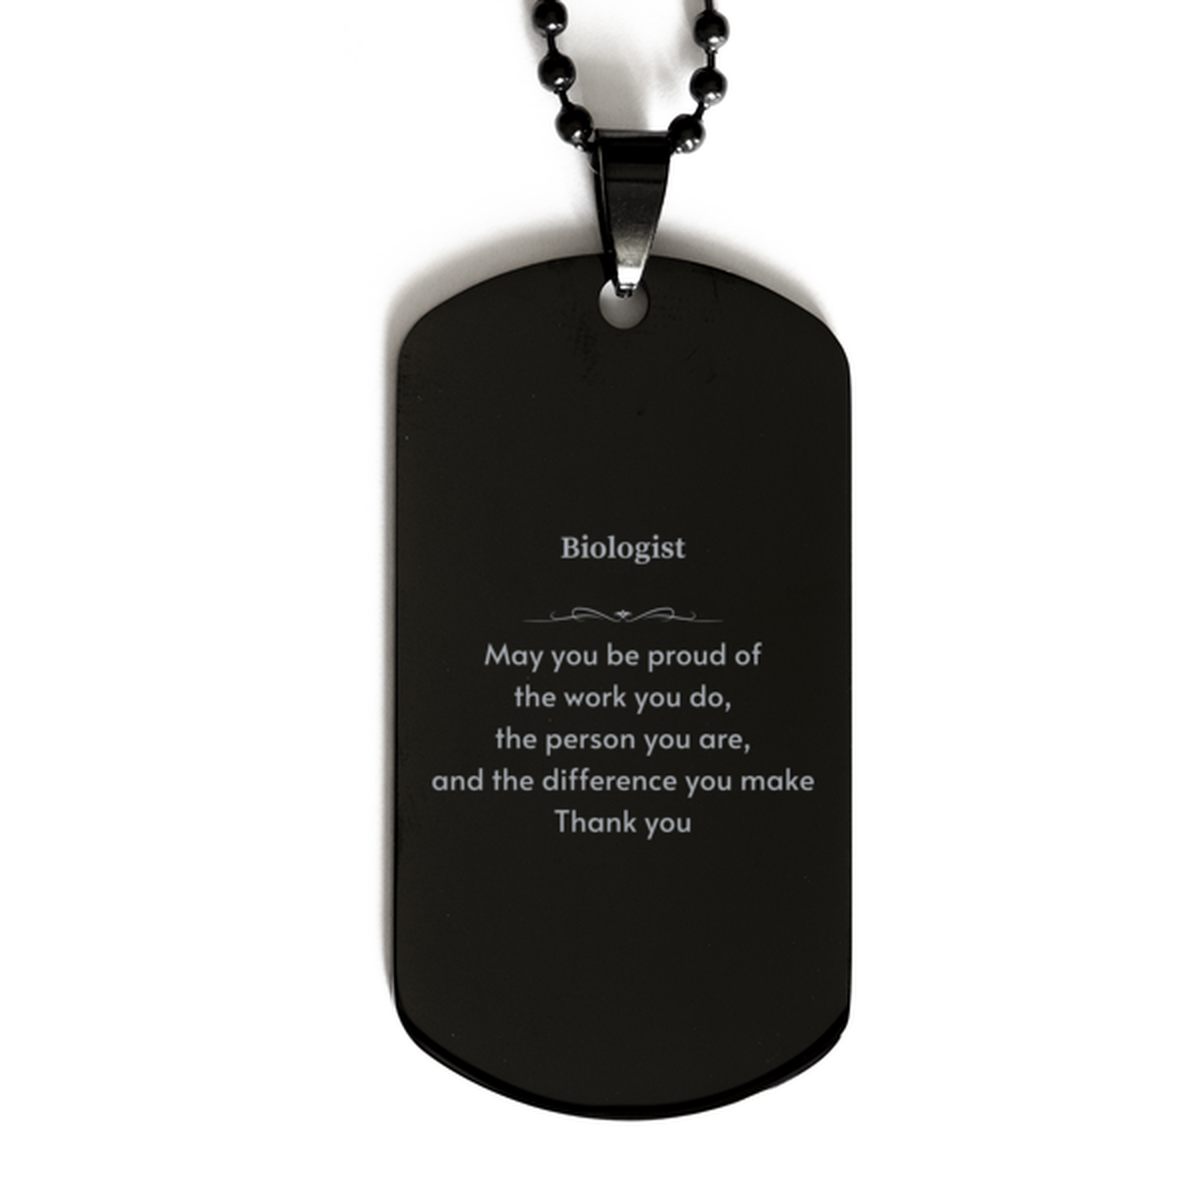 Heartwarming Black Dog Tag Retirement Coworkers Gifts for Biologist, Biologist May You be proud of the work you do, the person you are Gifts for Boss Men Women Friends